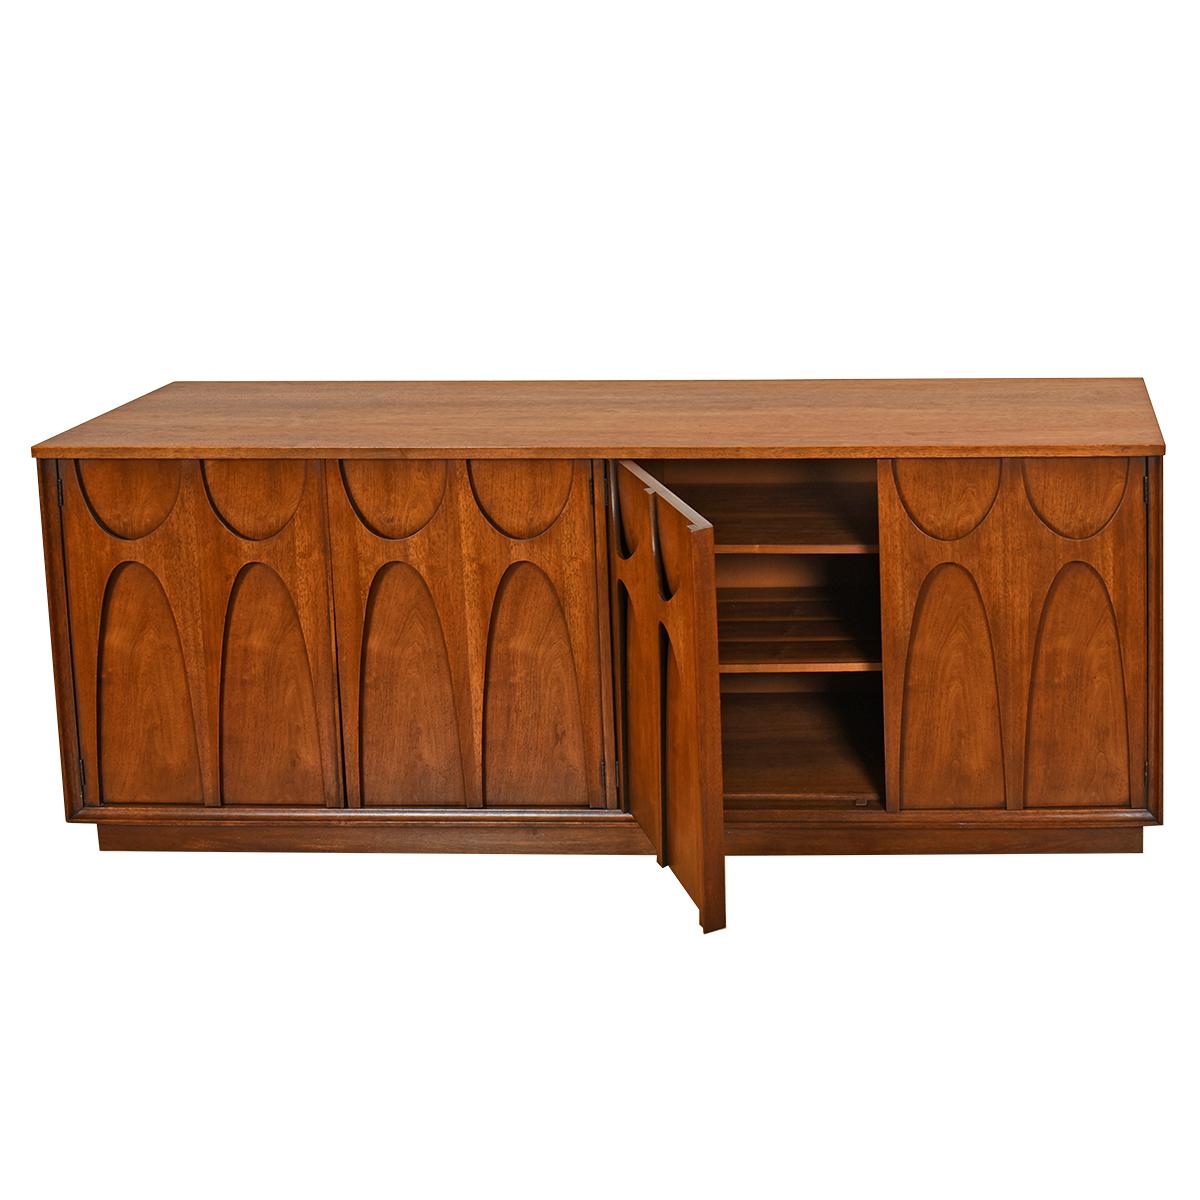 The Coveted 72? 4-Door Credenza Buffet in Walnut by Broyhill Brasilia

Additional Information:
Material: Walnut
Featured at Kensington:
We are pleased to present this stunning piece from the celebrated Broyhill Brasilia line.
8 of the beloved